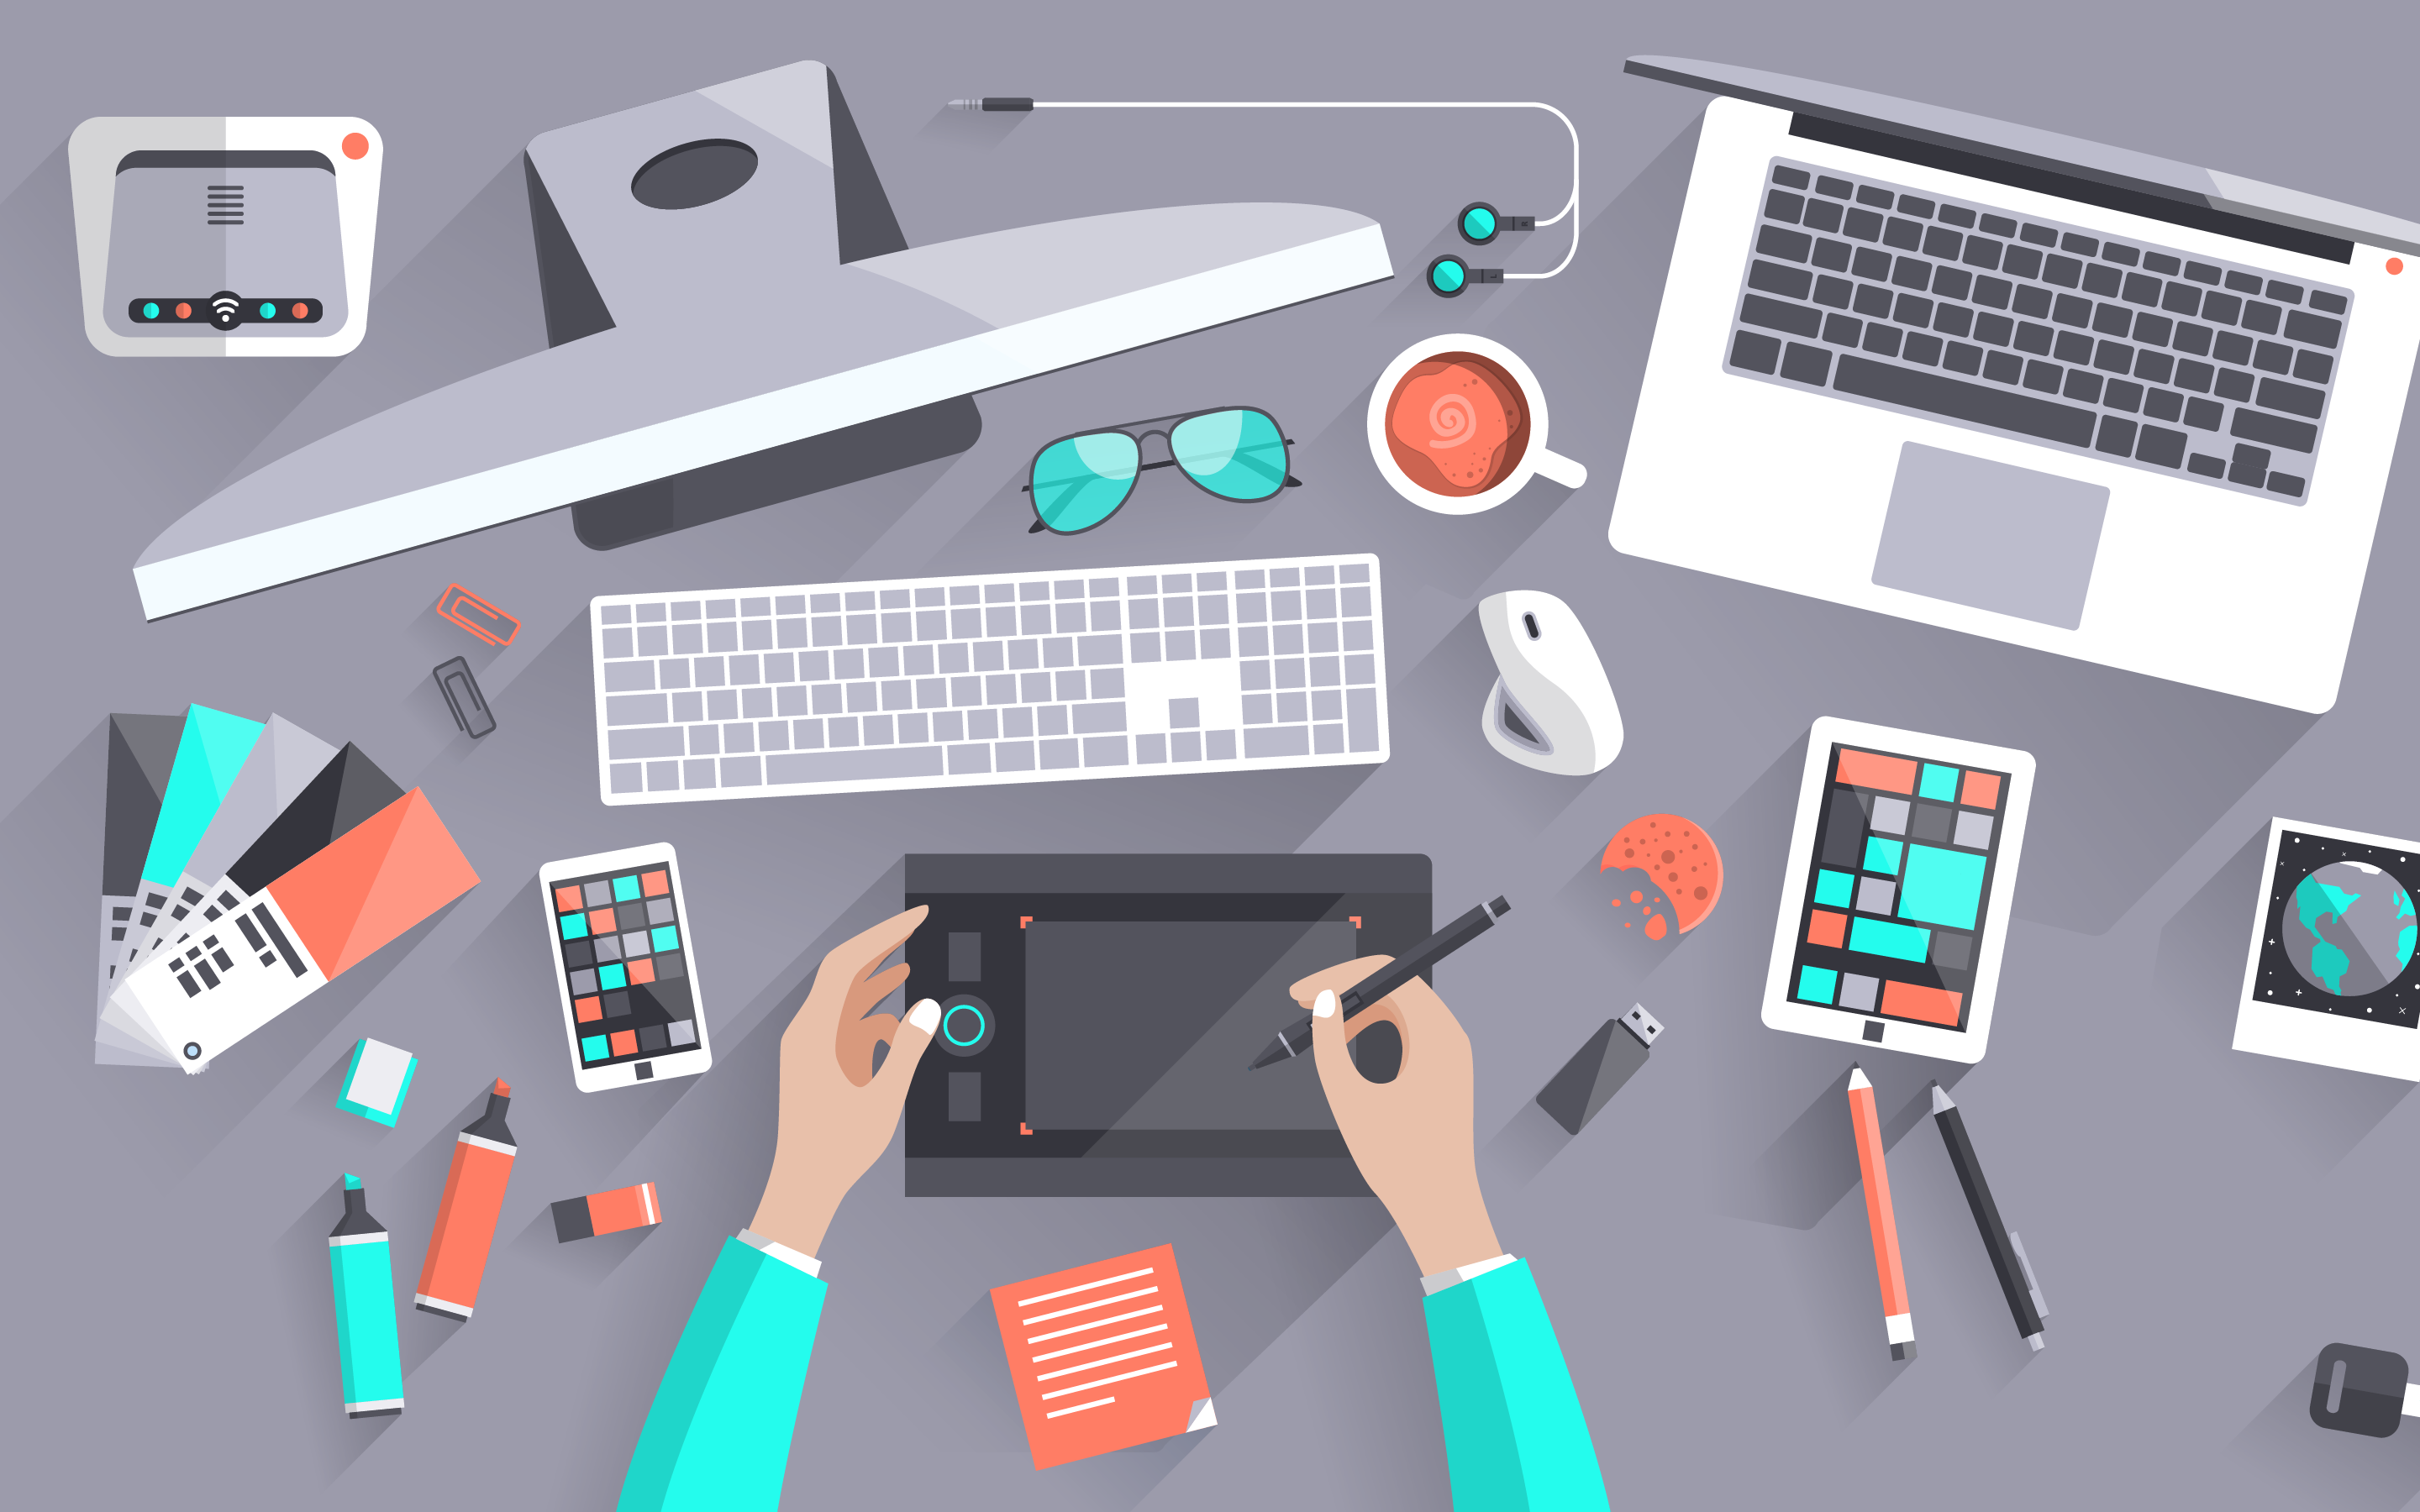 15 Great Tools & Resources That You Need to Try - Web Design Ledger